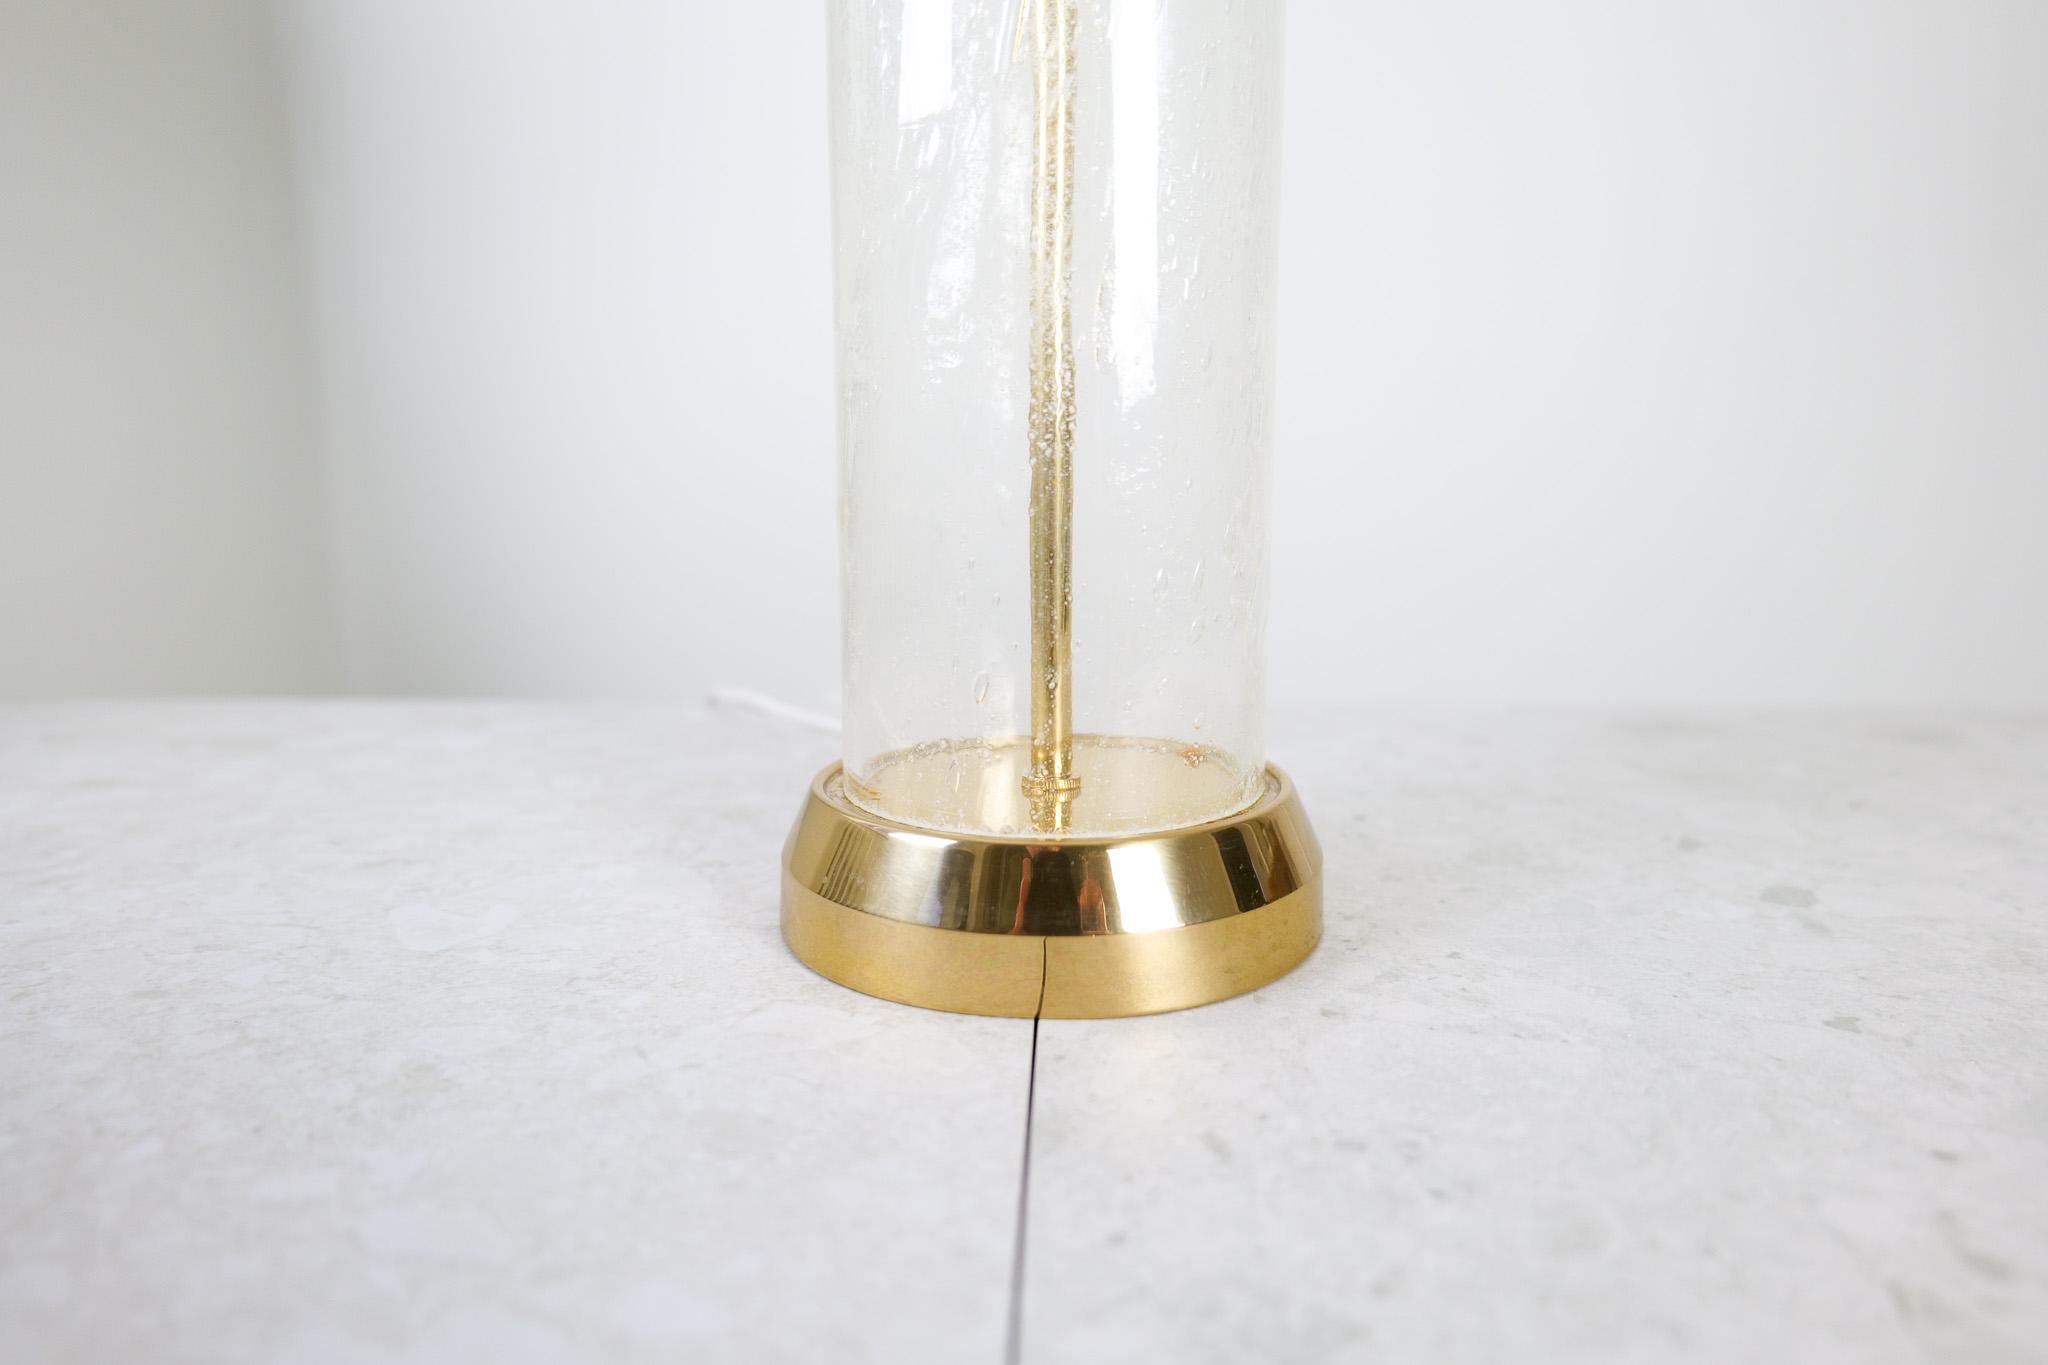 Midcentury Modern Glass and Brass Table Lamp Bergbom B-019 Sweden 1960s In Good Condition For Sale In Hillringsberg, SE